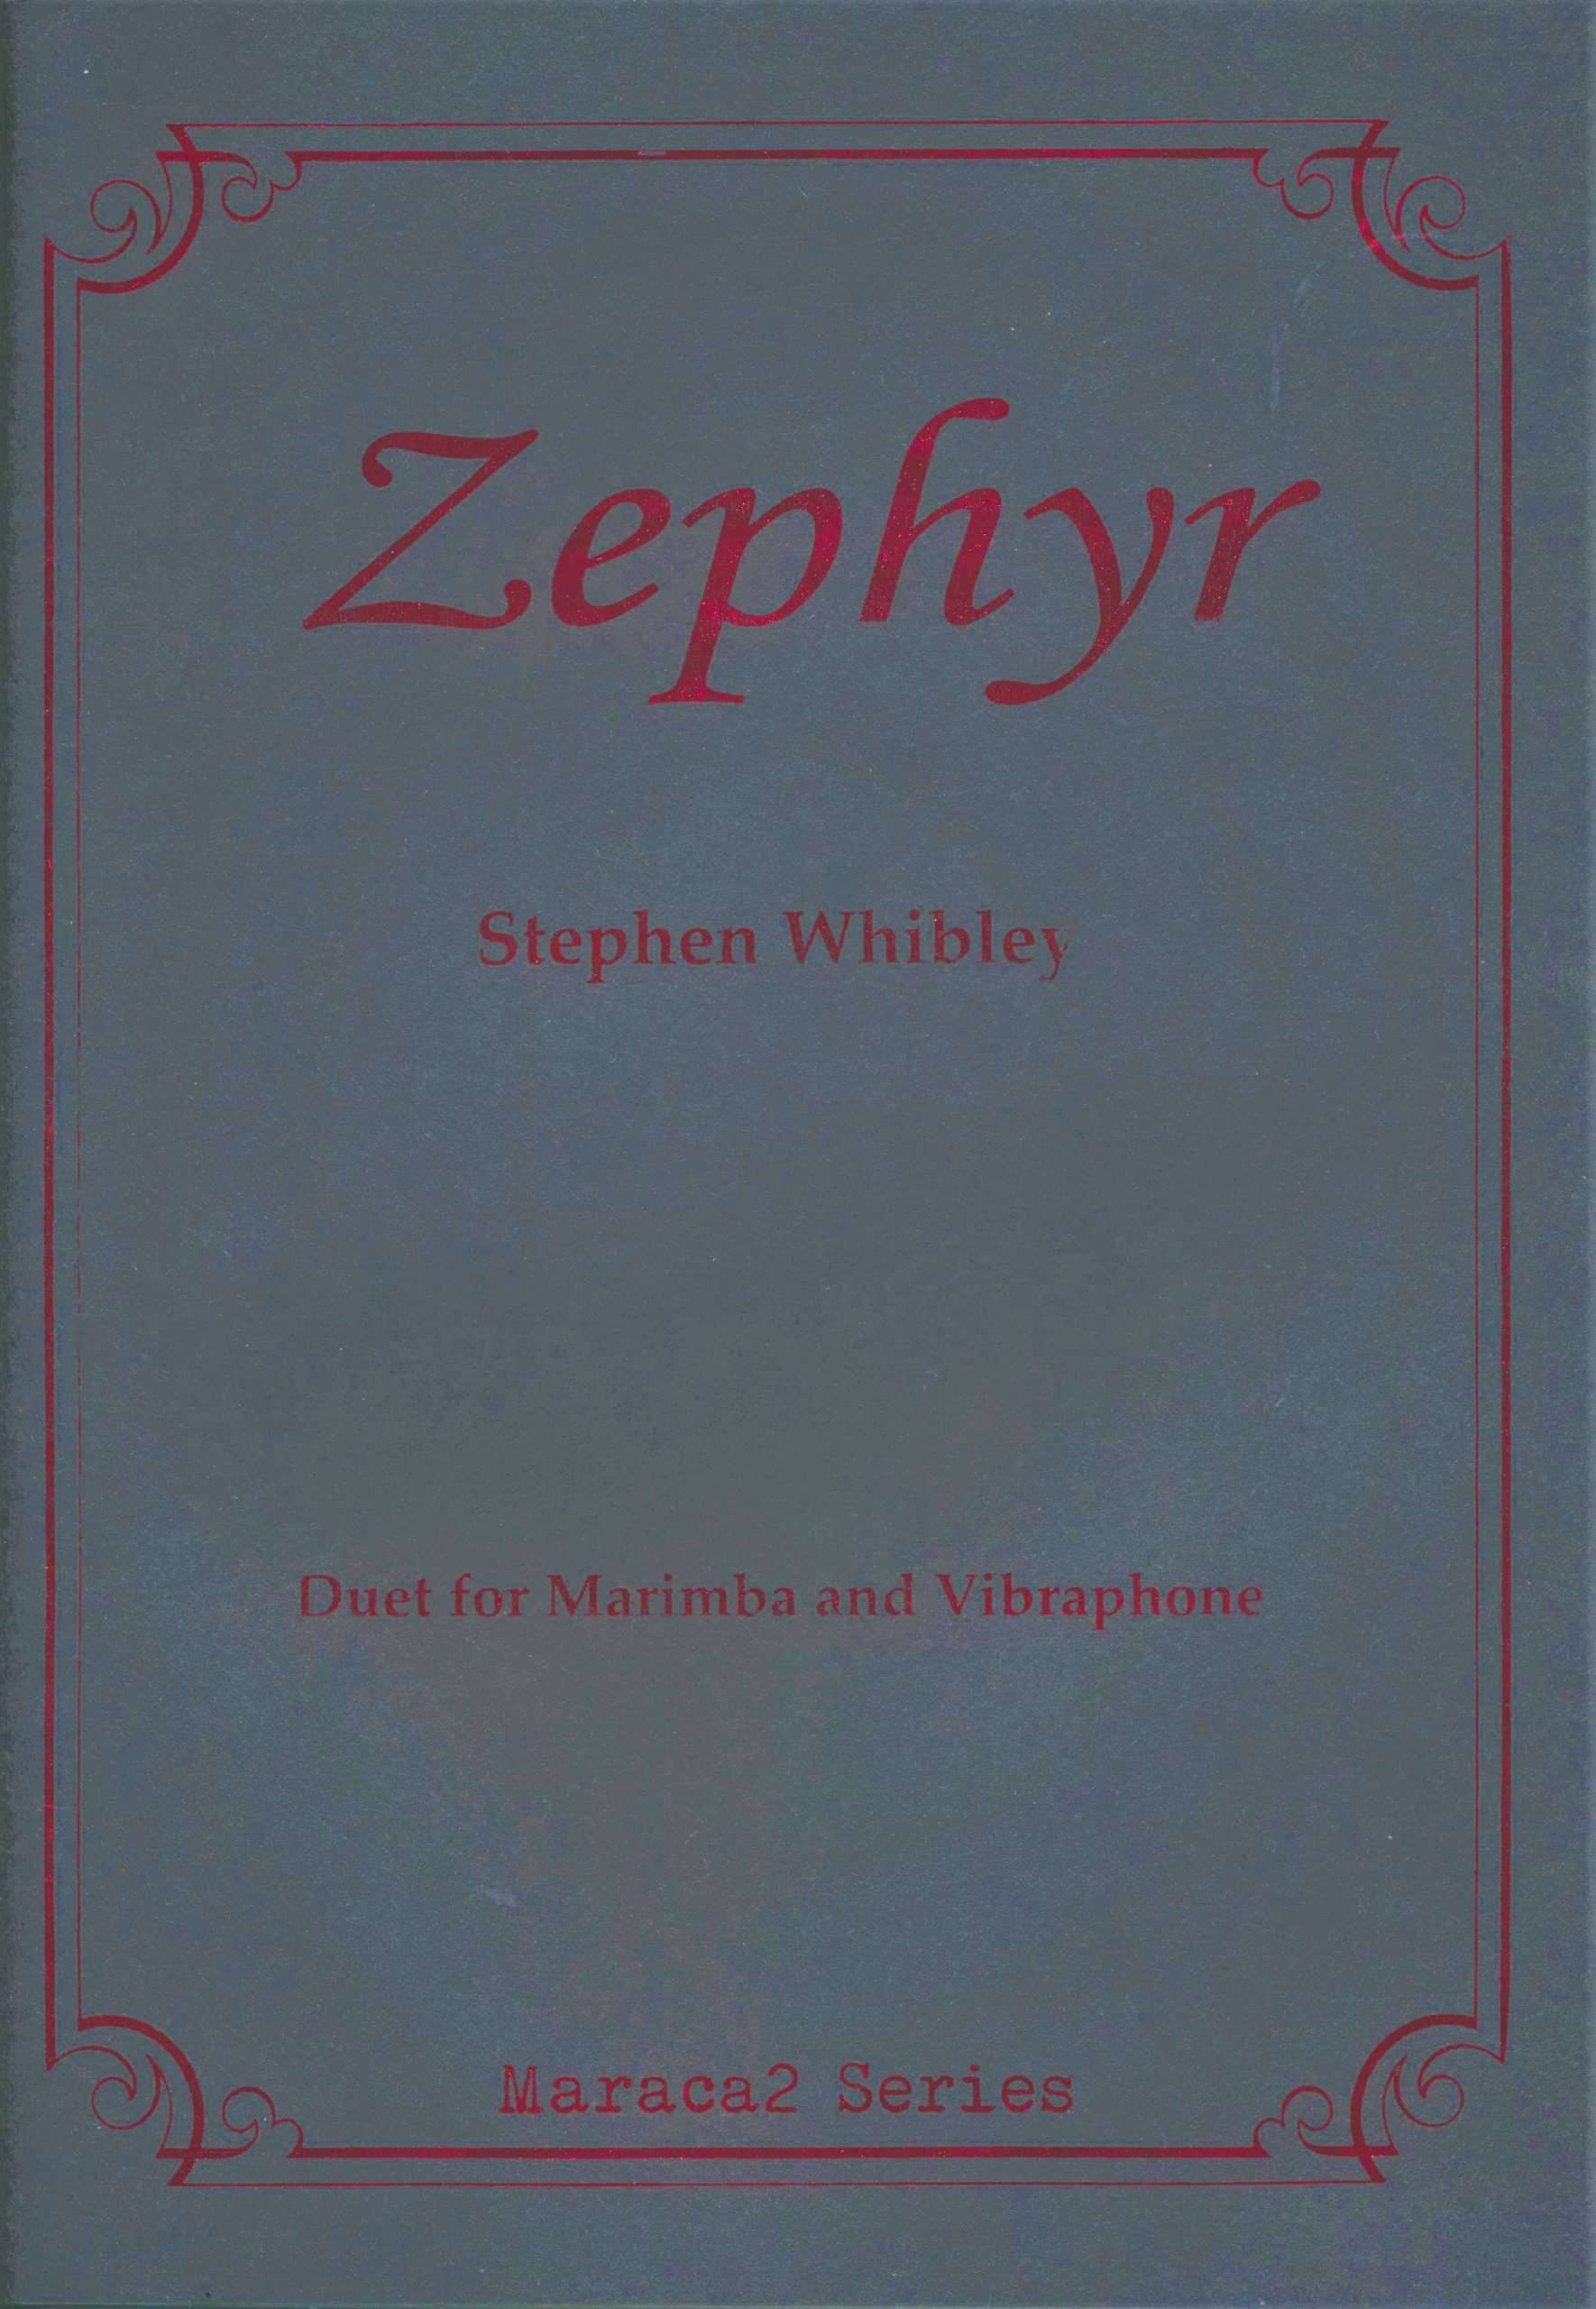 Zephyr by Stephen Whibley